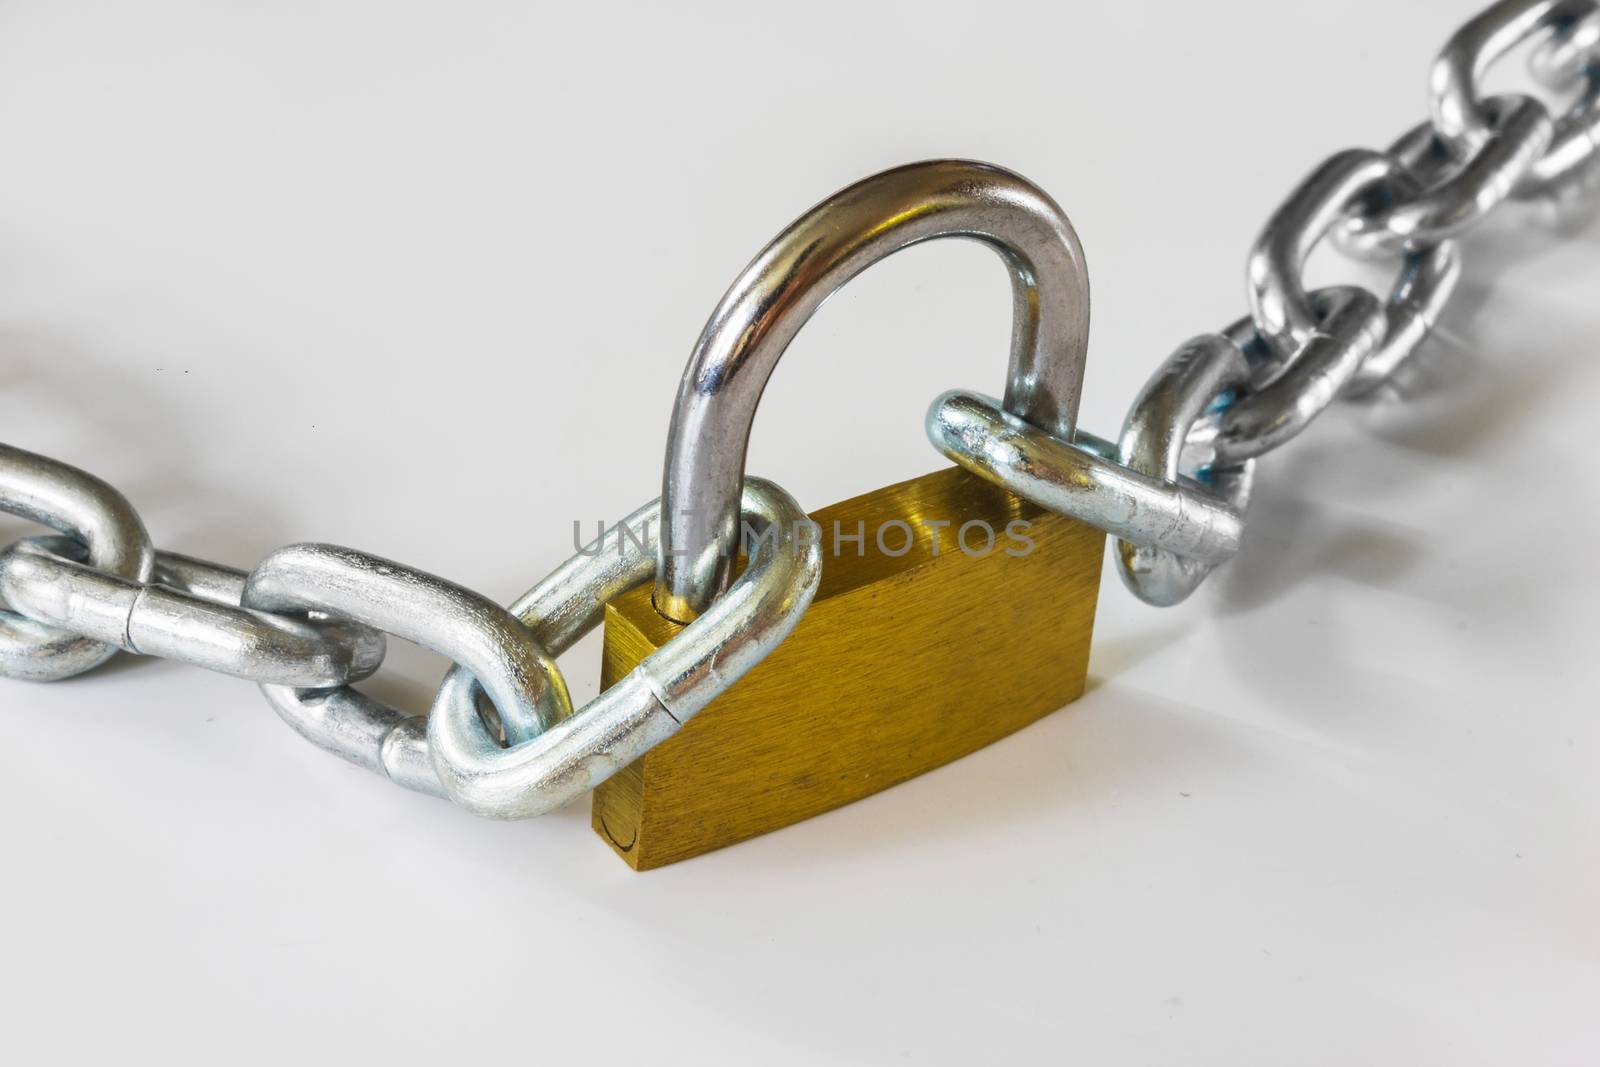 padlock with metal chain on a white background